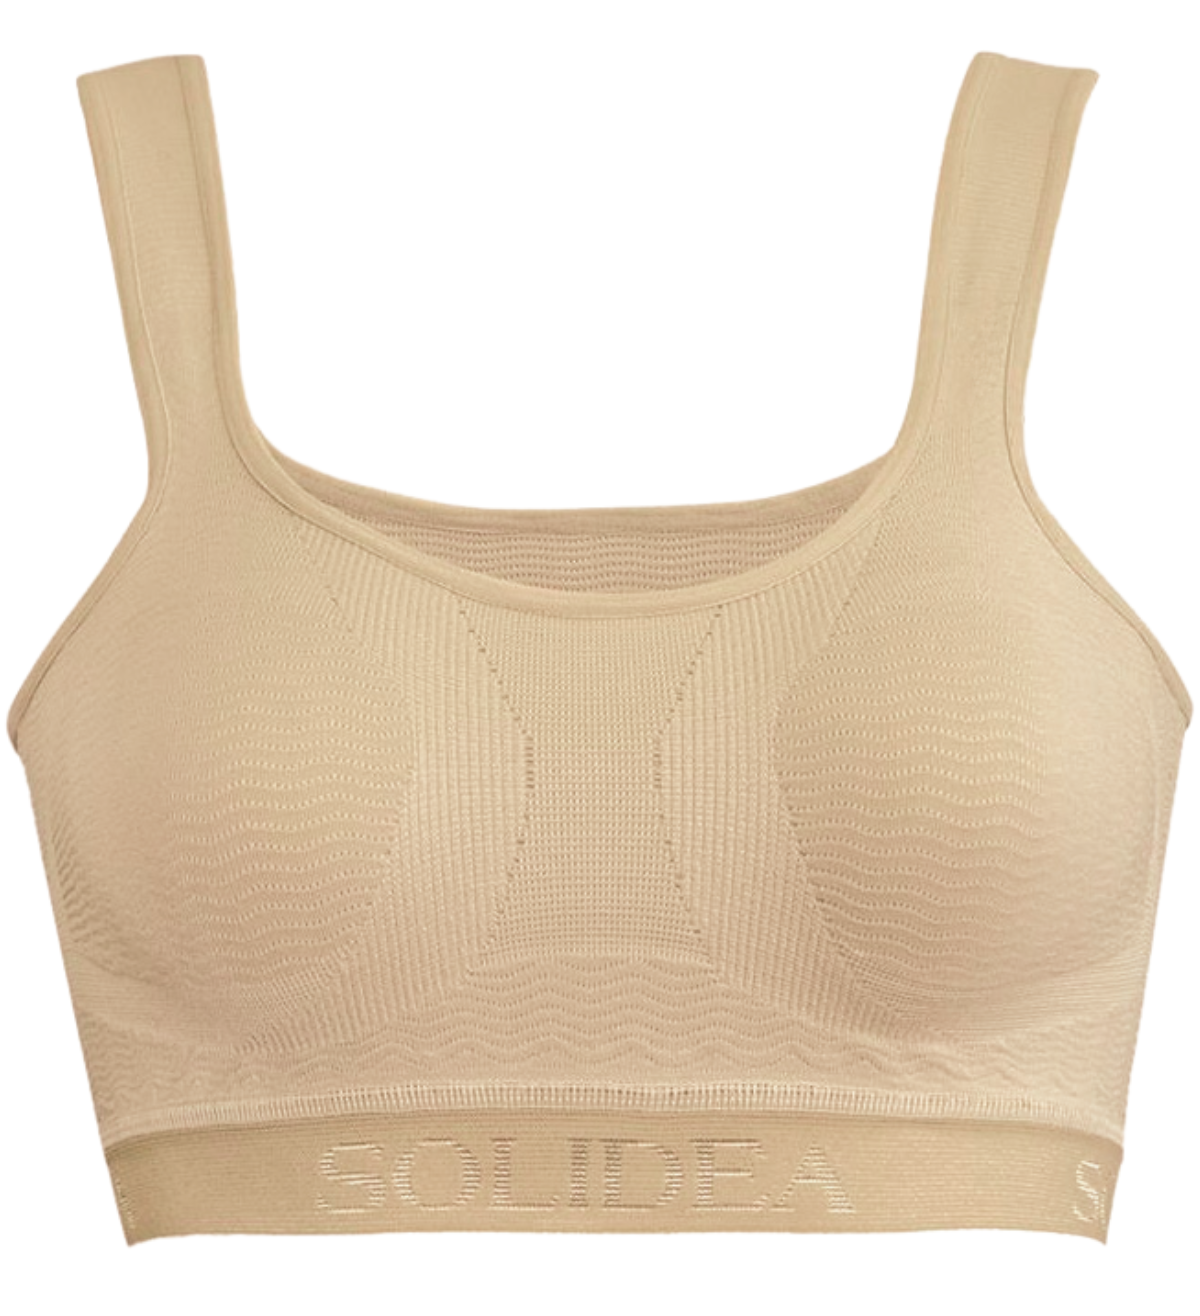 Aueoeo Compression Bra for Women, Women's Removable Padded Yoga